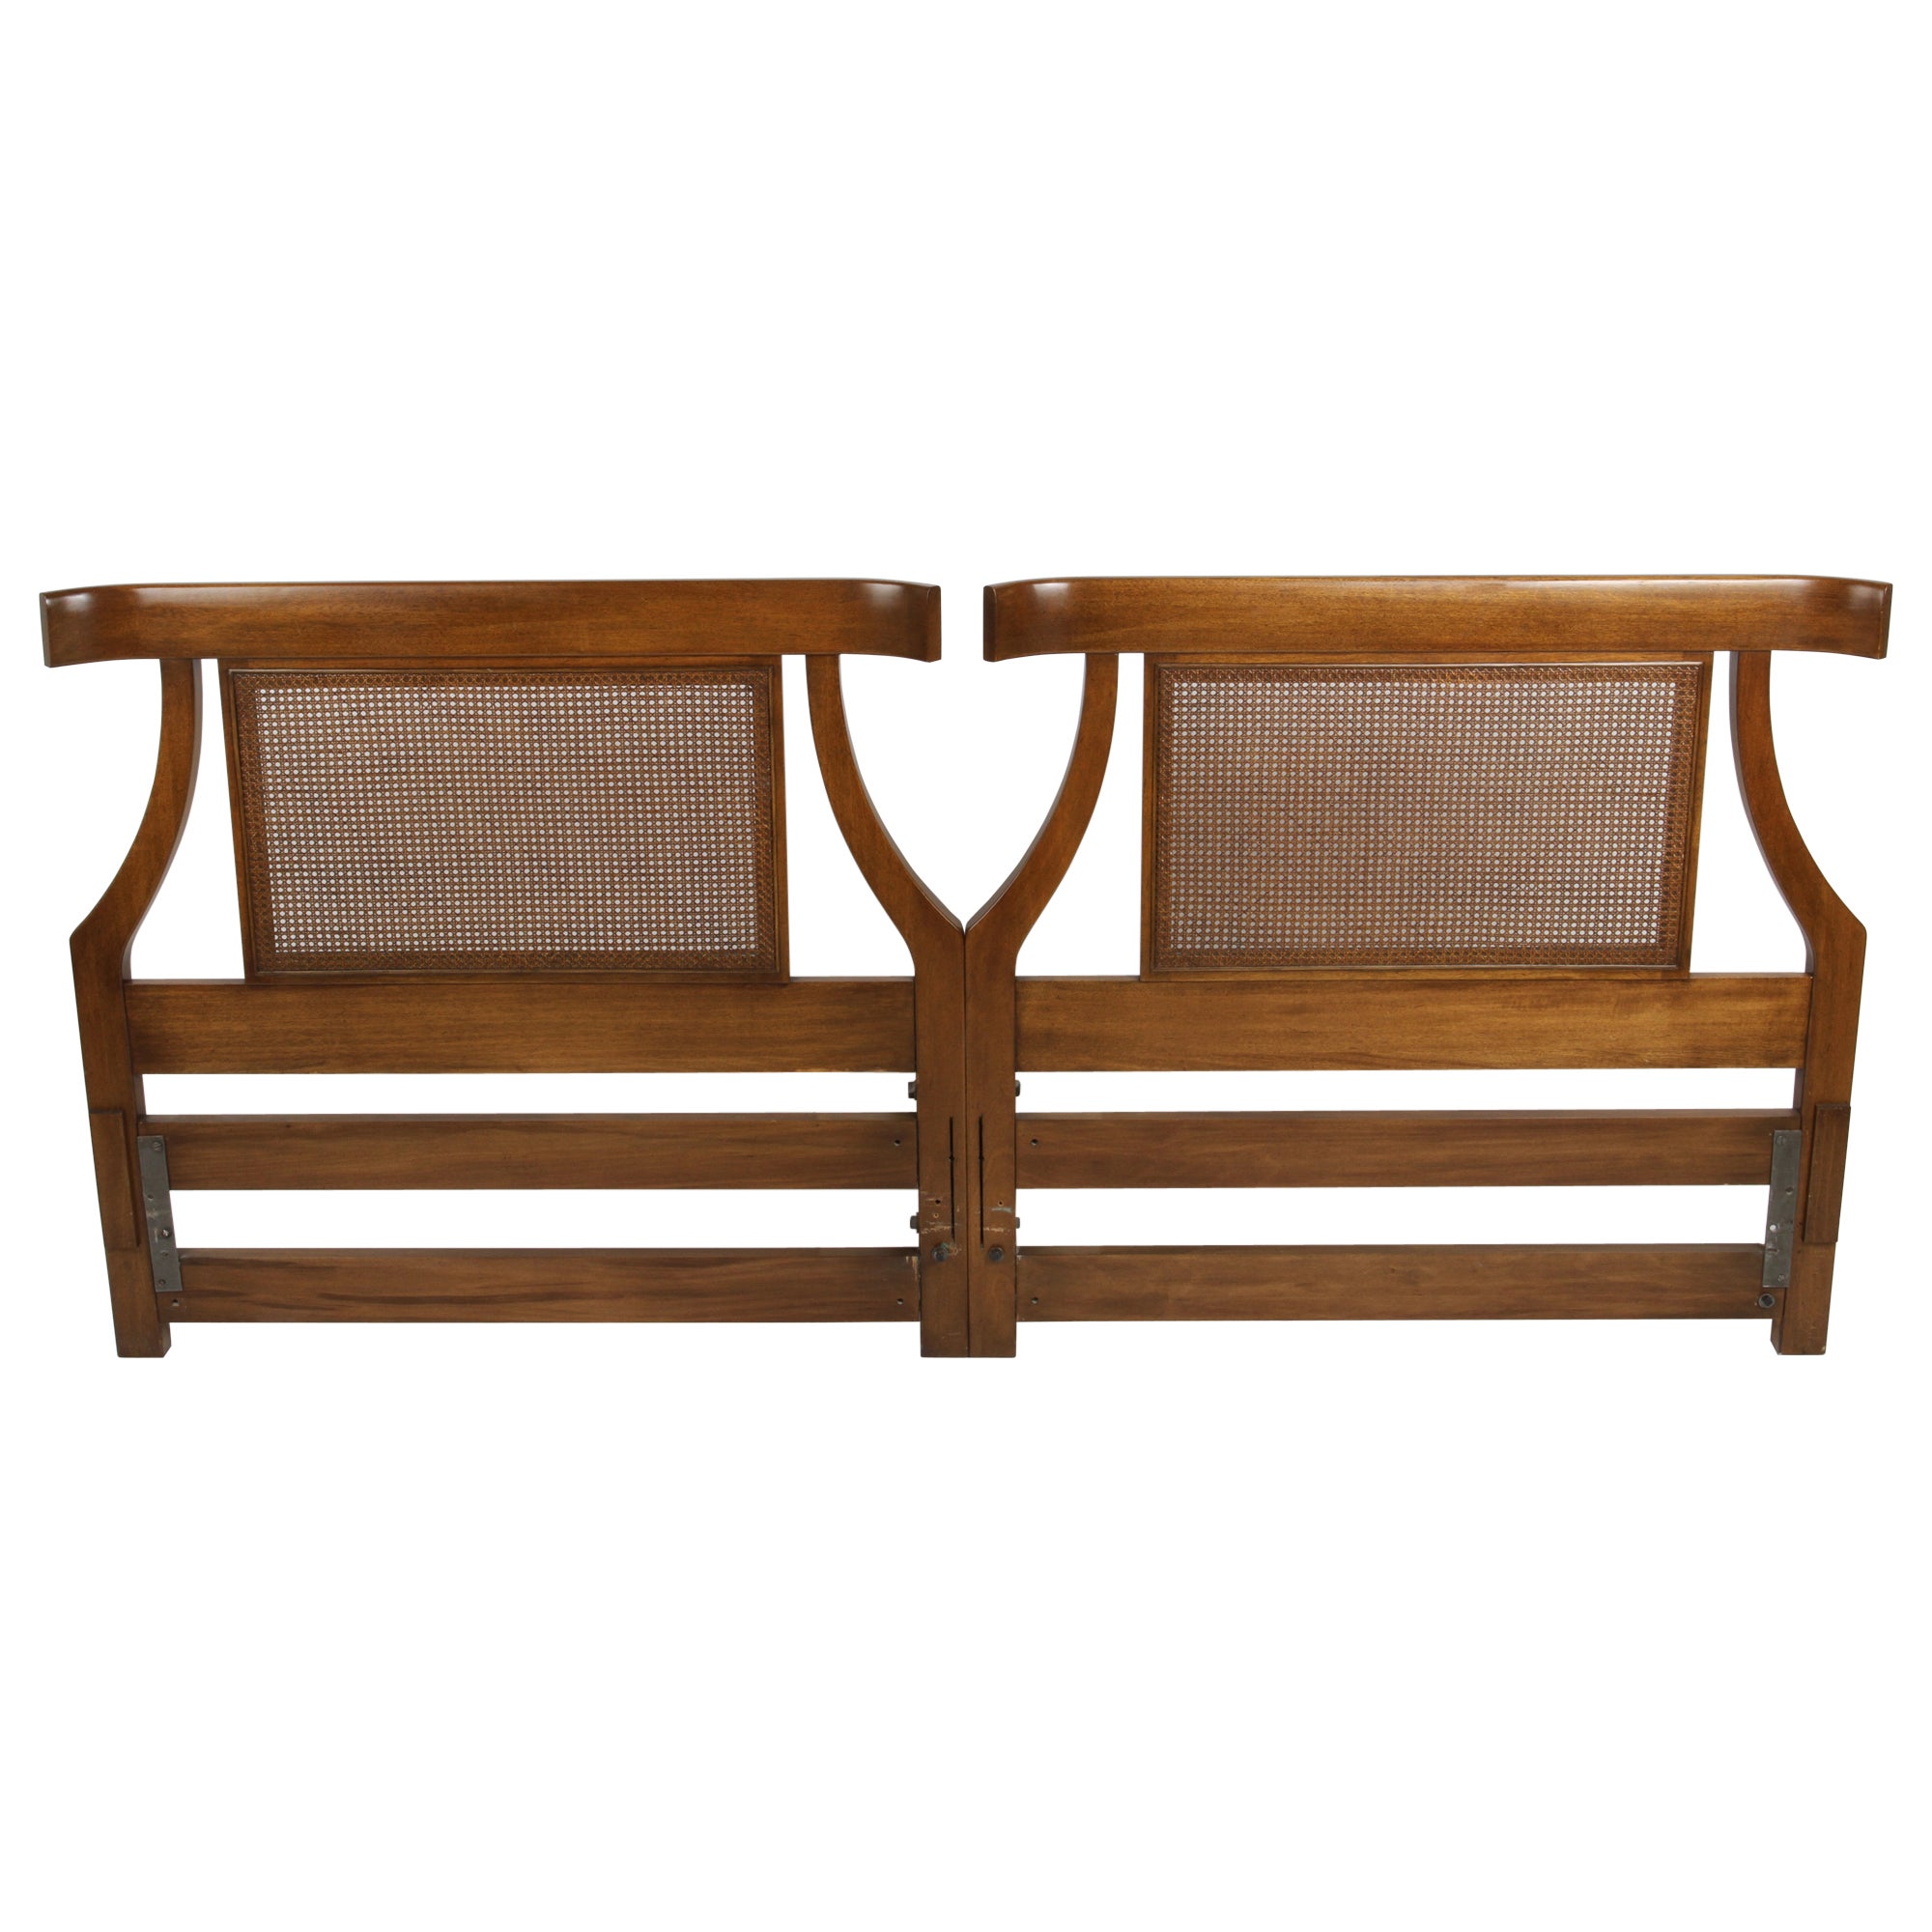 1960s Mid-Century Modern Curved Sculptural Mahogany & Cane King Size Headboard For Sale